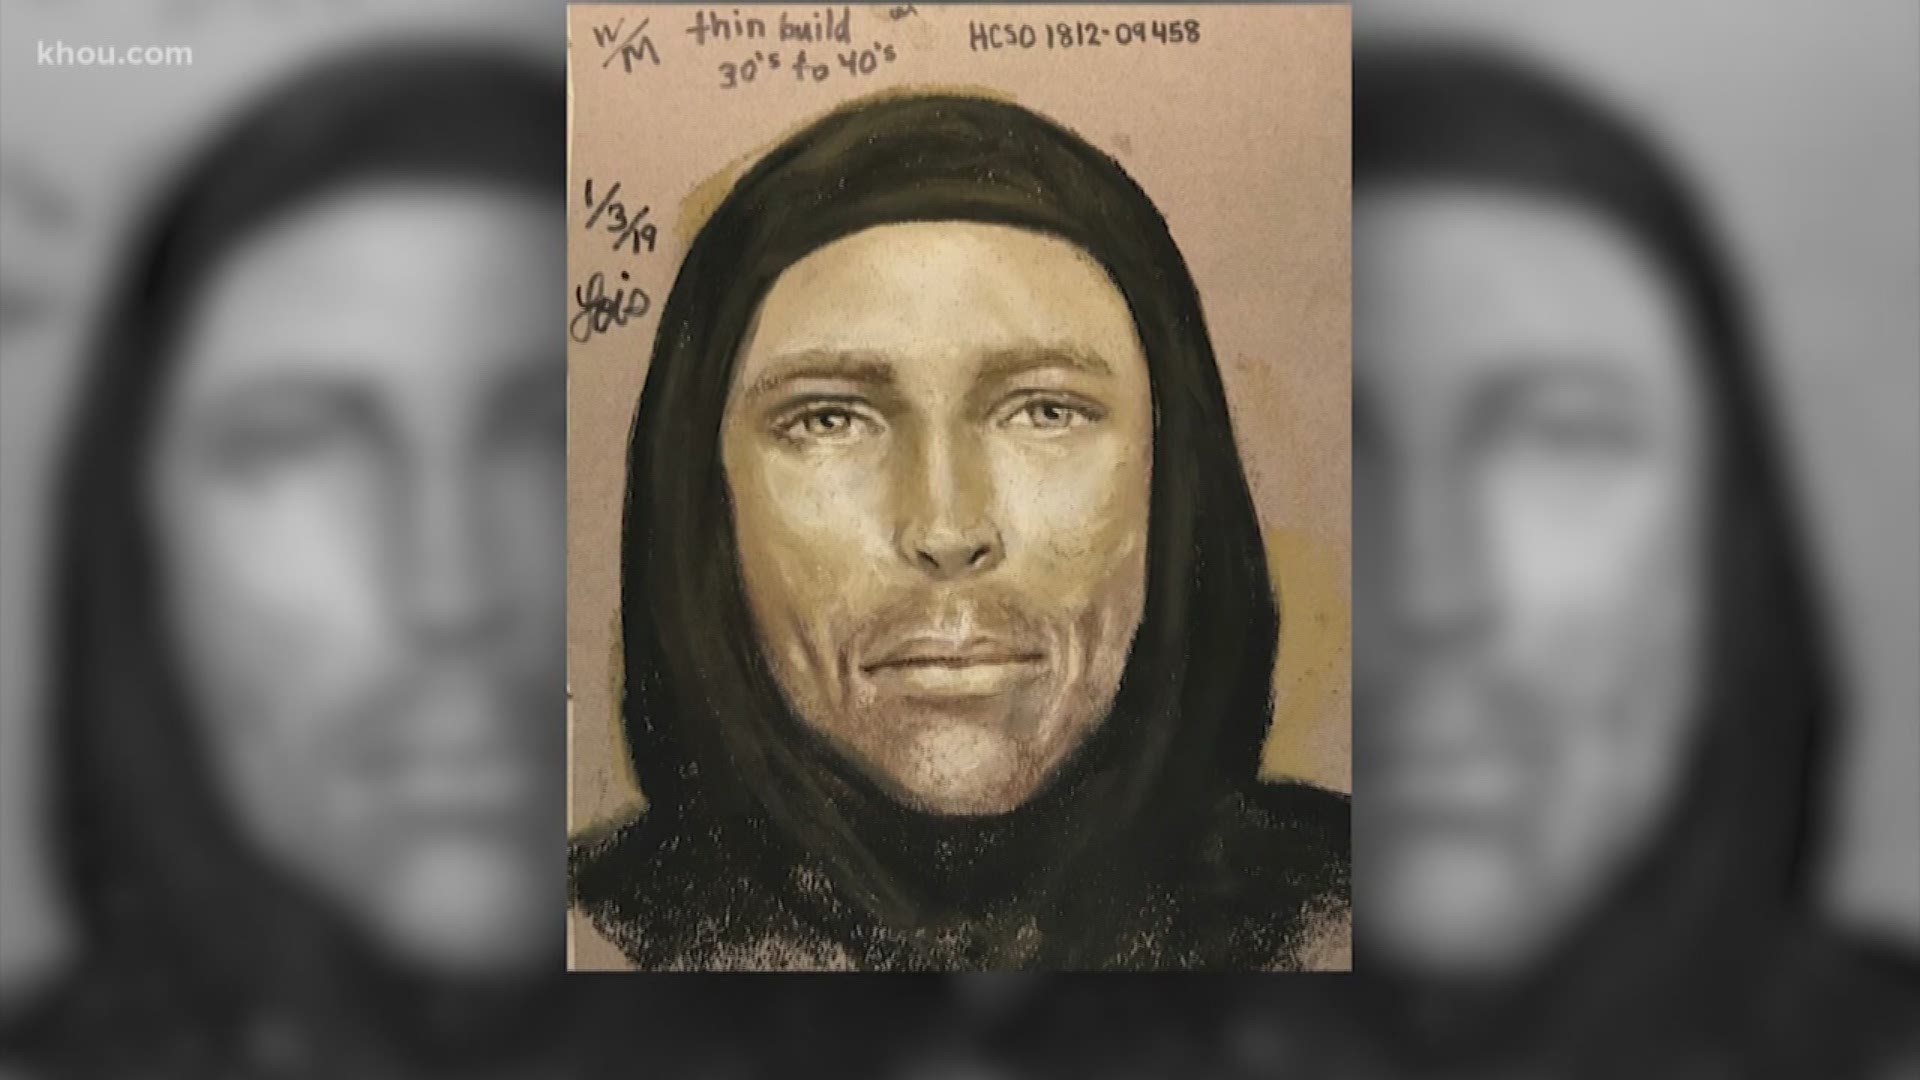 The Harris County Sheriff's Office on Thursday Authorities have released a sketch of the man wanted in the murder of 7-year-old Jazmine Barnes.